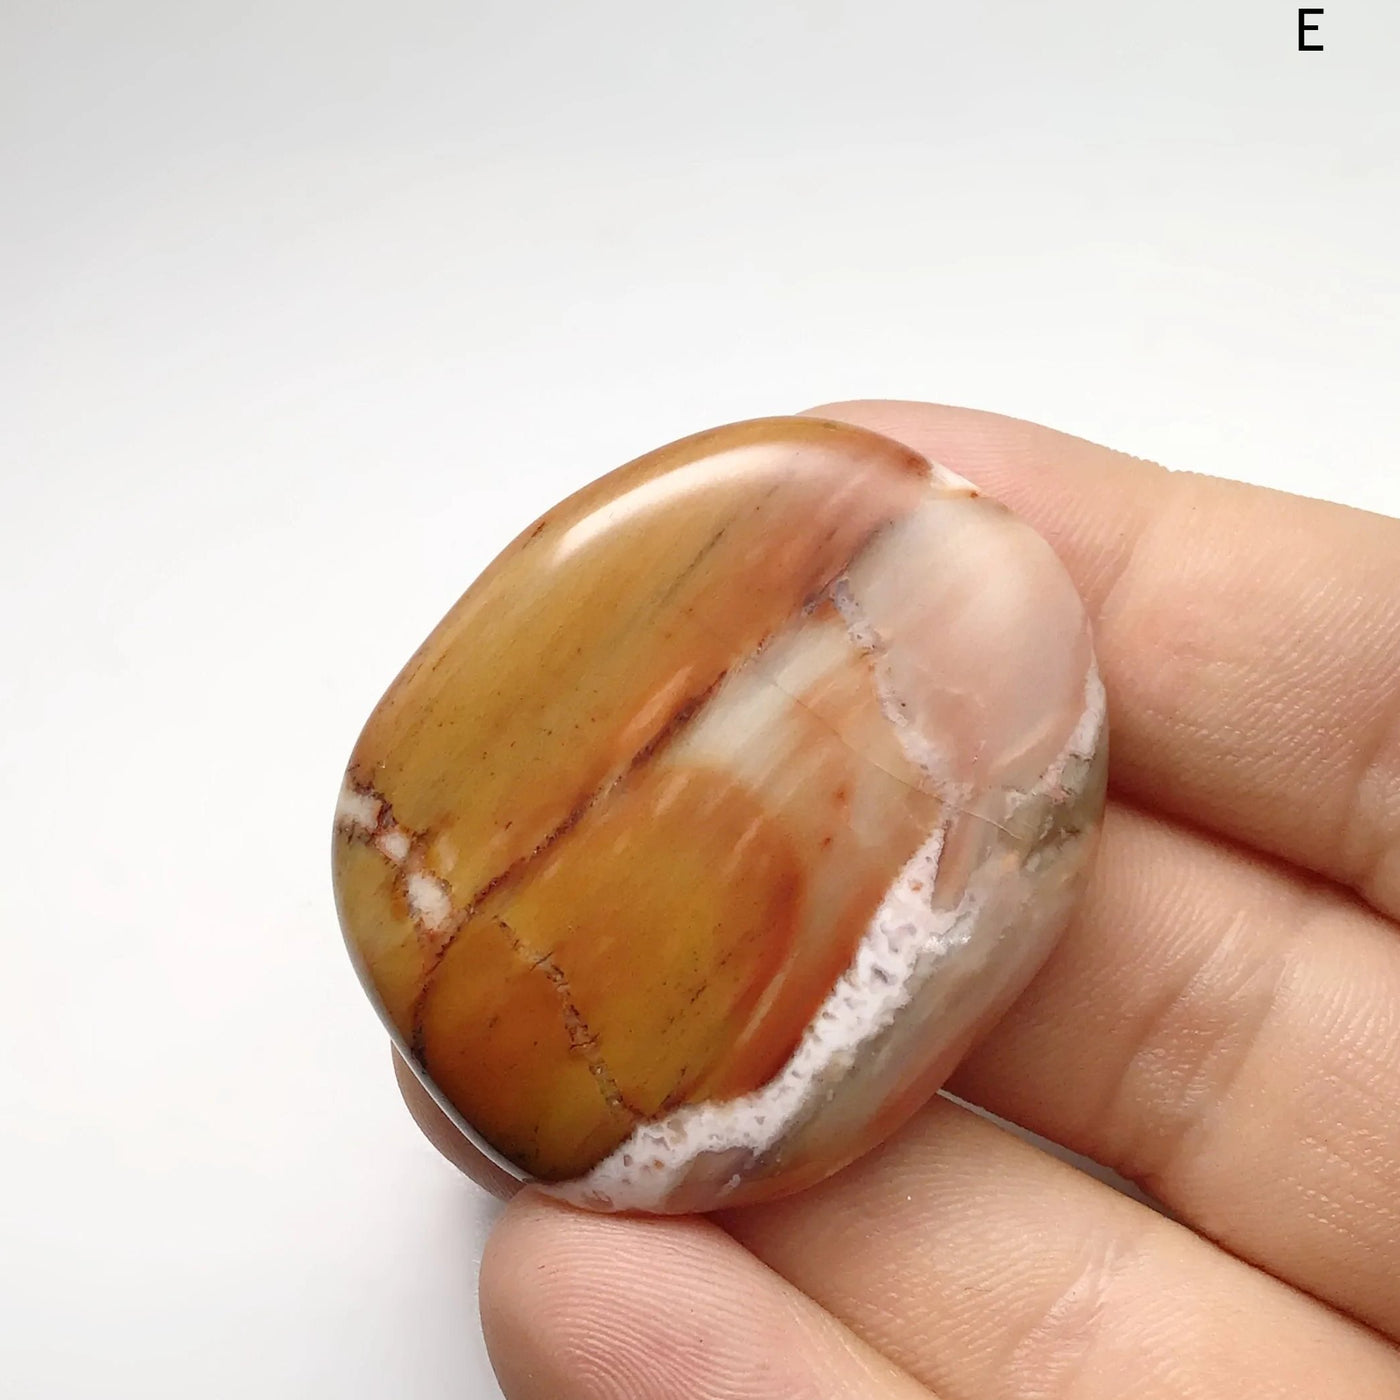 Petrified Wood Touch Stone at $29 Each